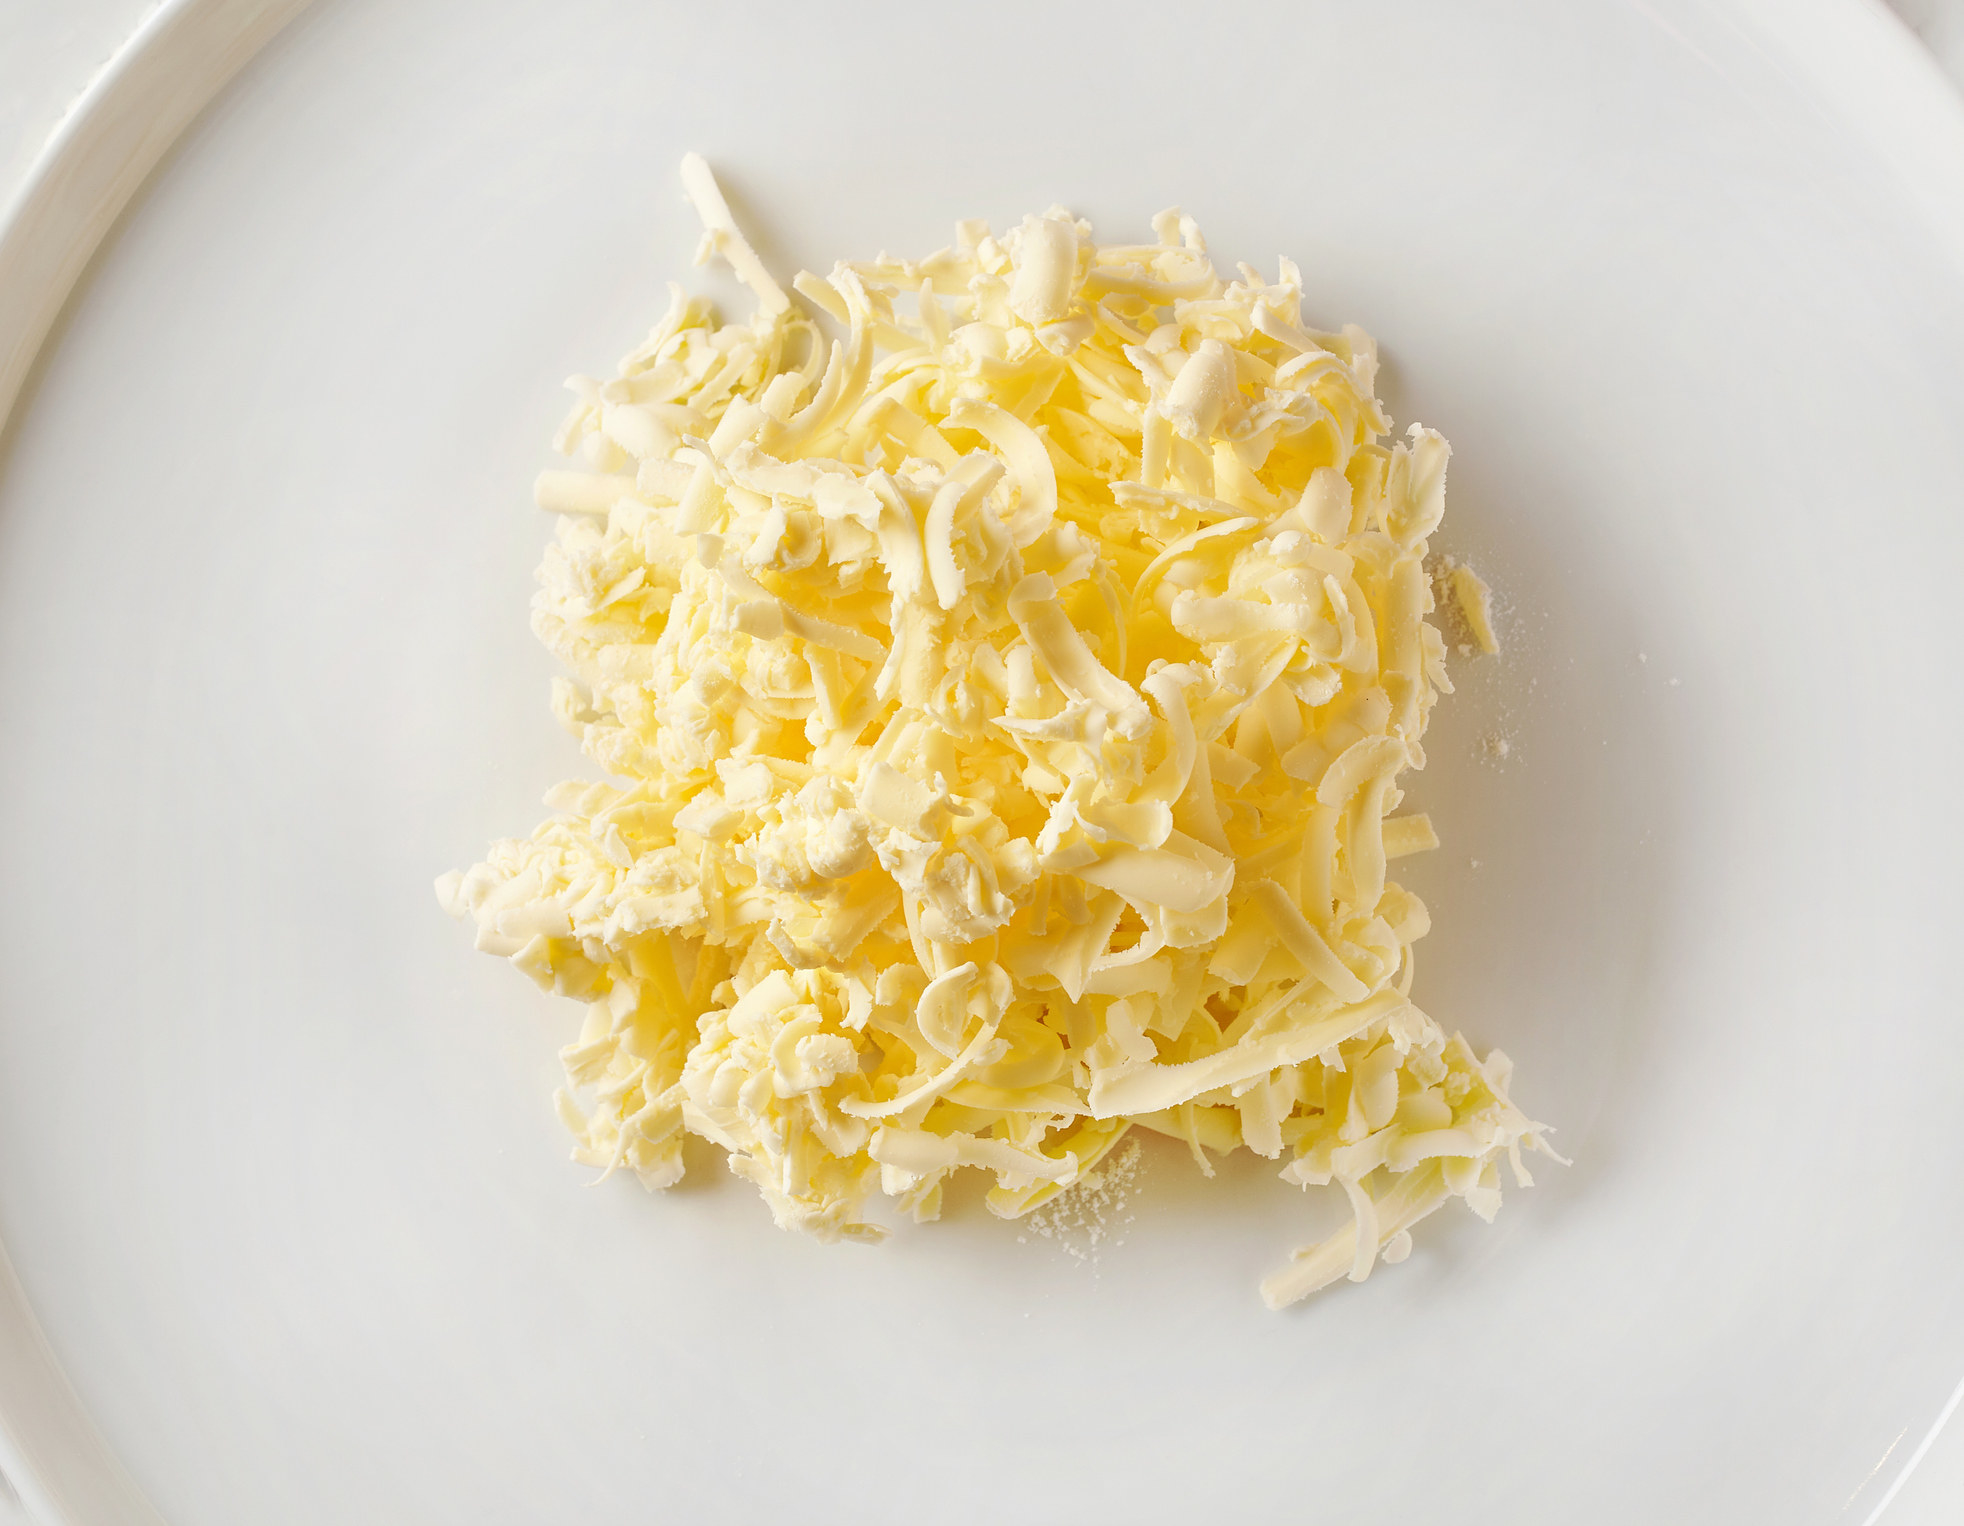 Cold grated butter on a plate.